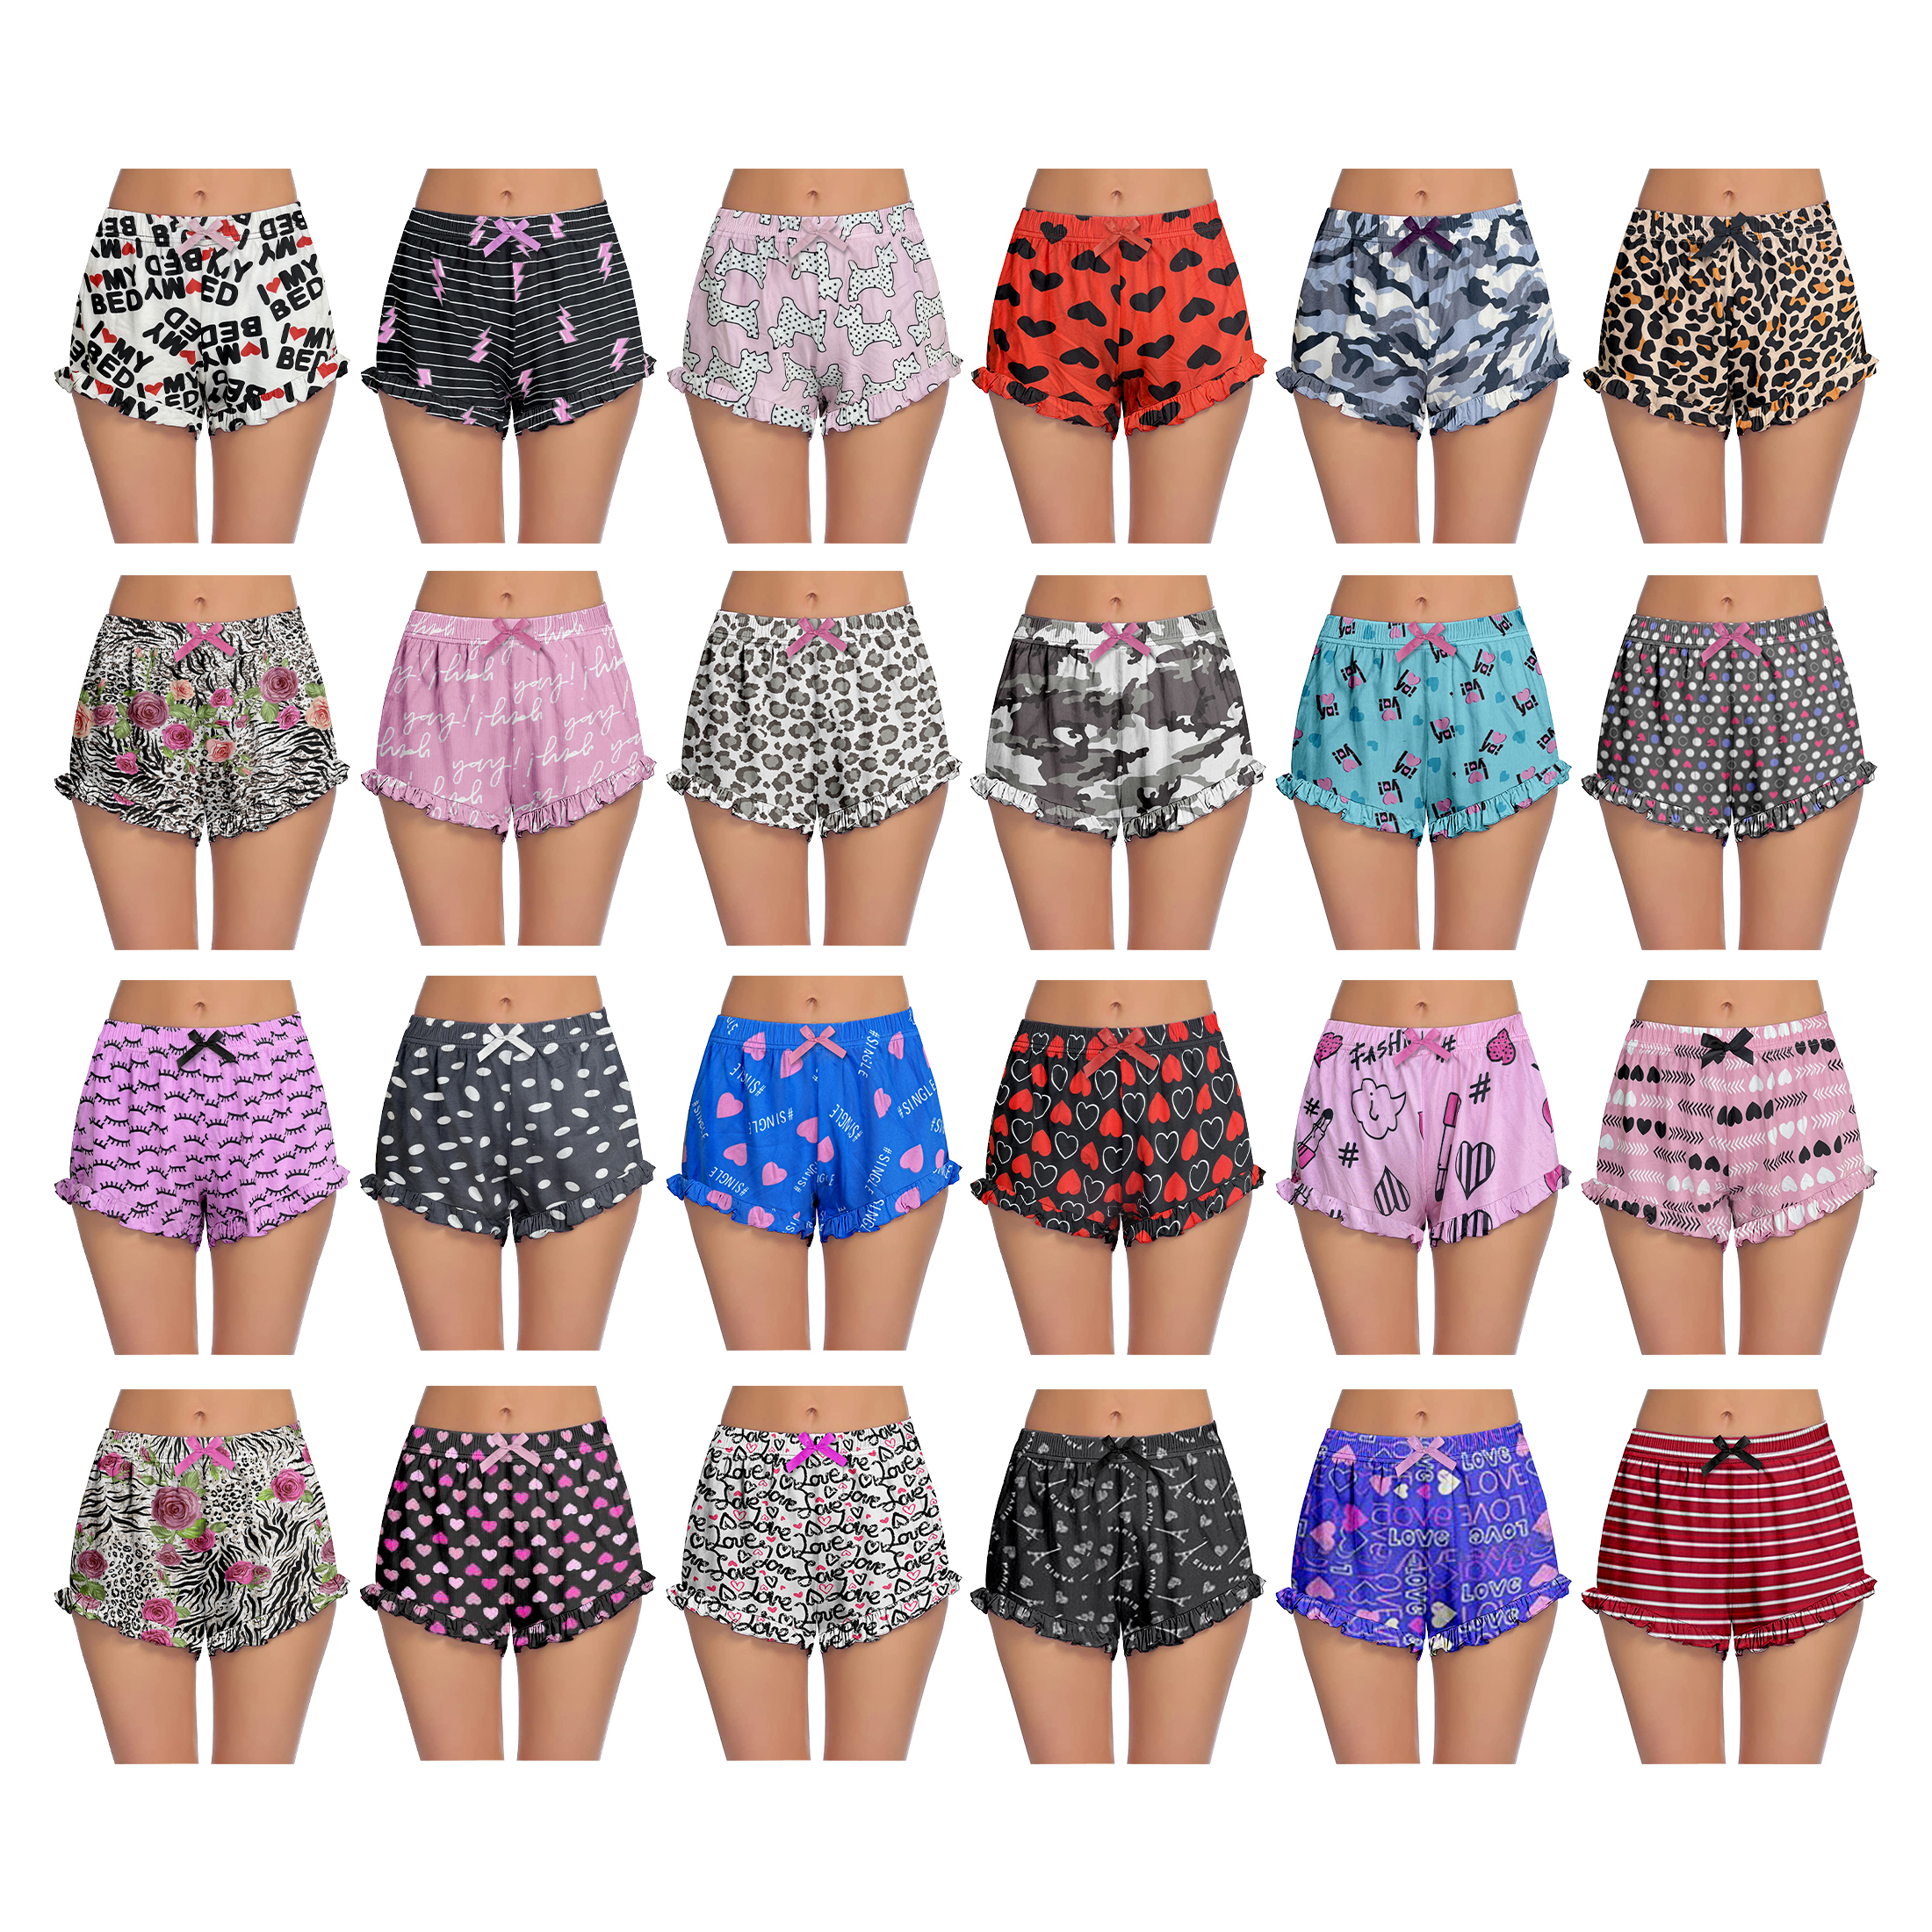 6-Pack Women's Casual Printed Pajama Shorts Soft Stretchy Relaxed Fit Ladies Summer Yoga Bottoms - S